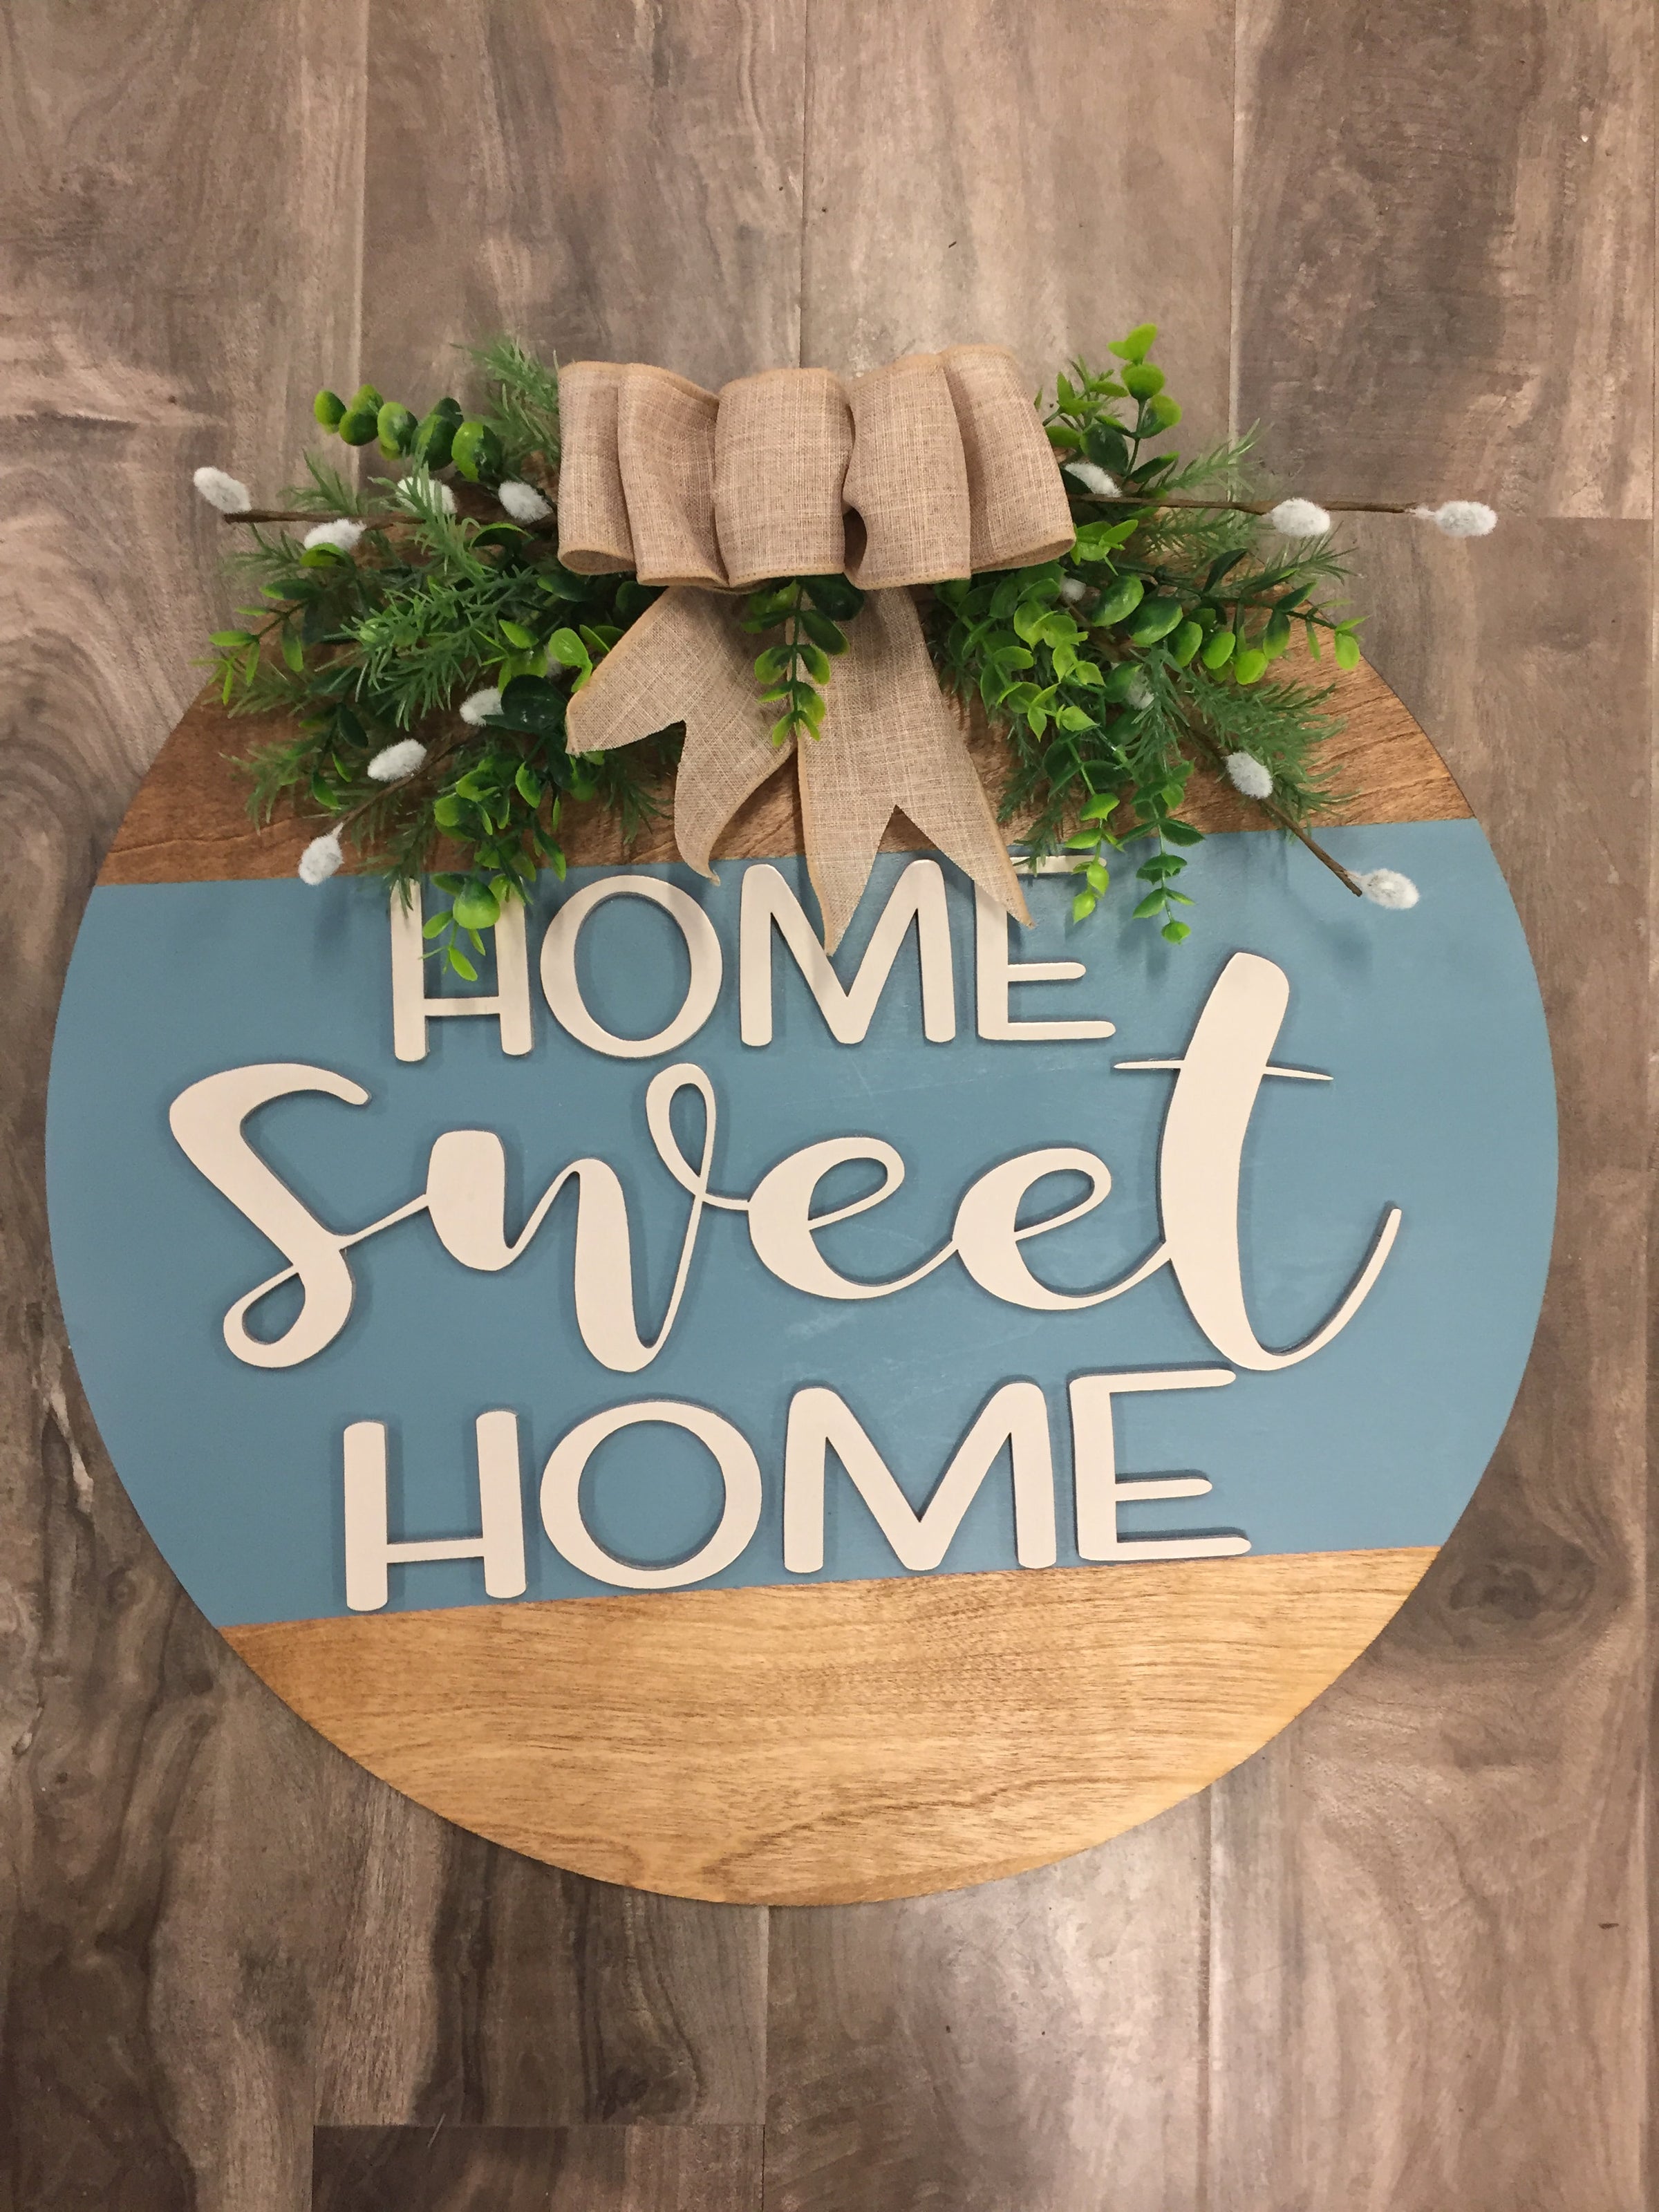 Home sweet home sign round